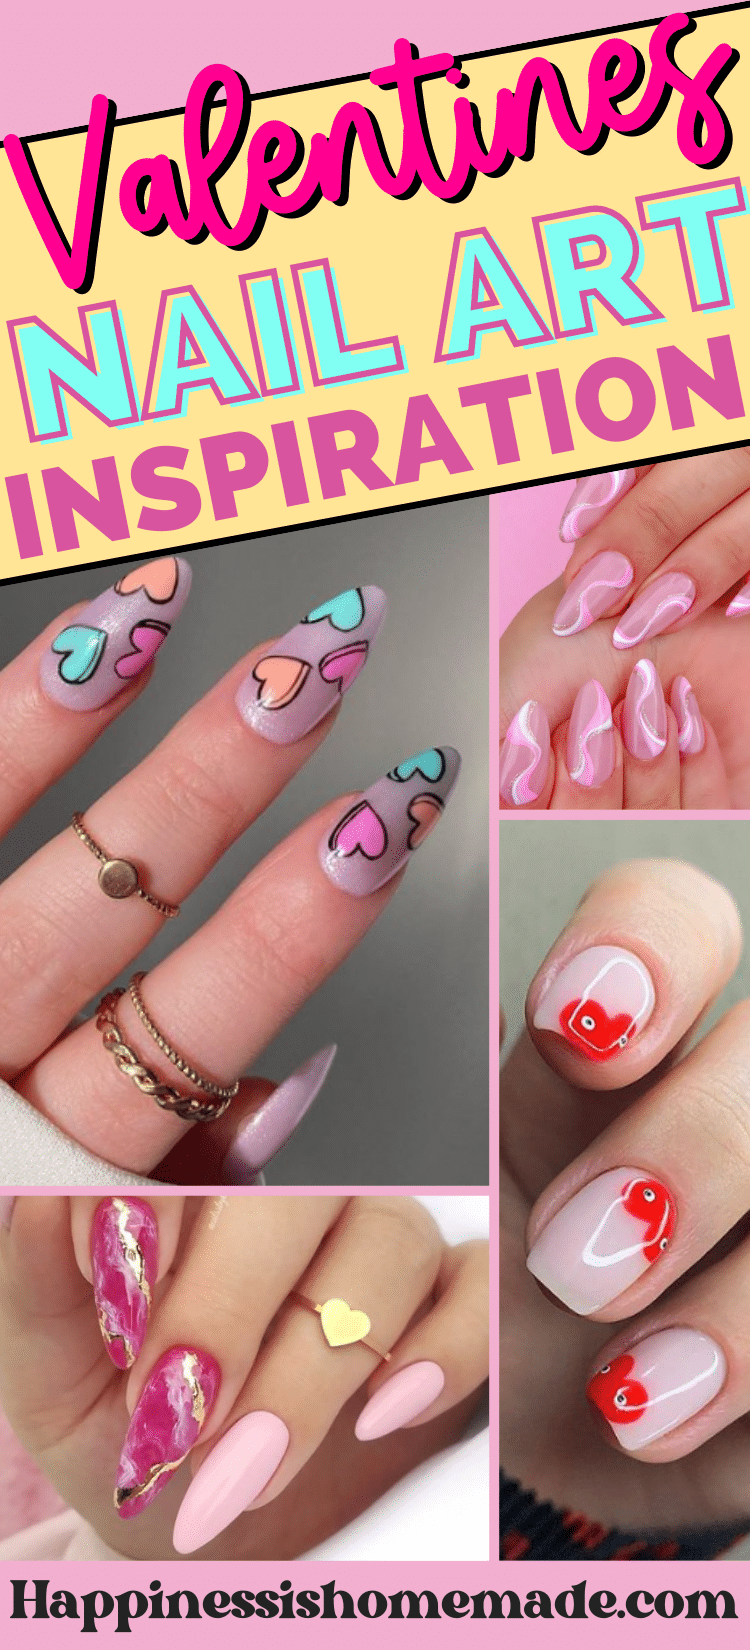 30+ Valentine's Day Nail Ideas - Happiness is Homemade